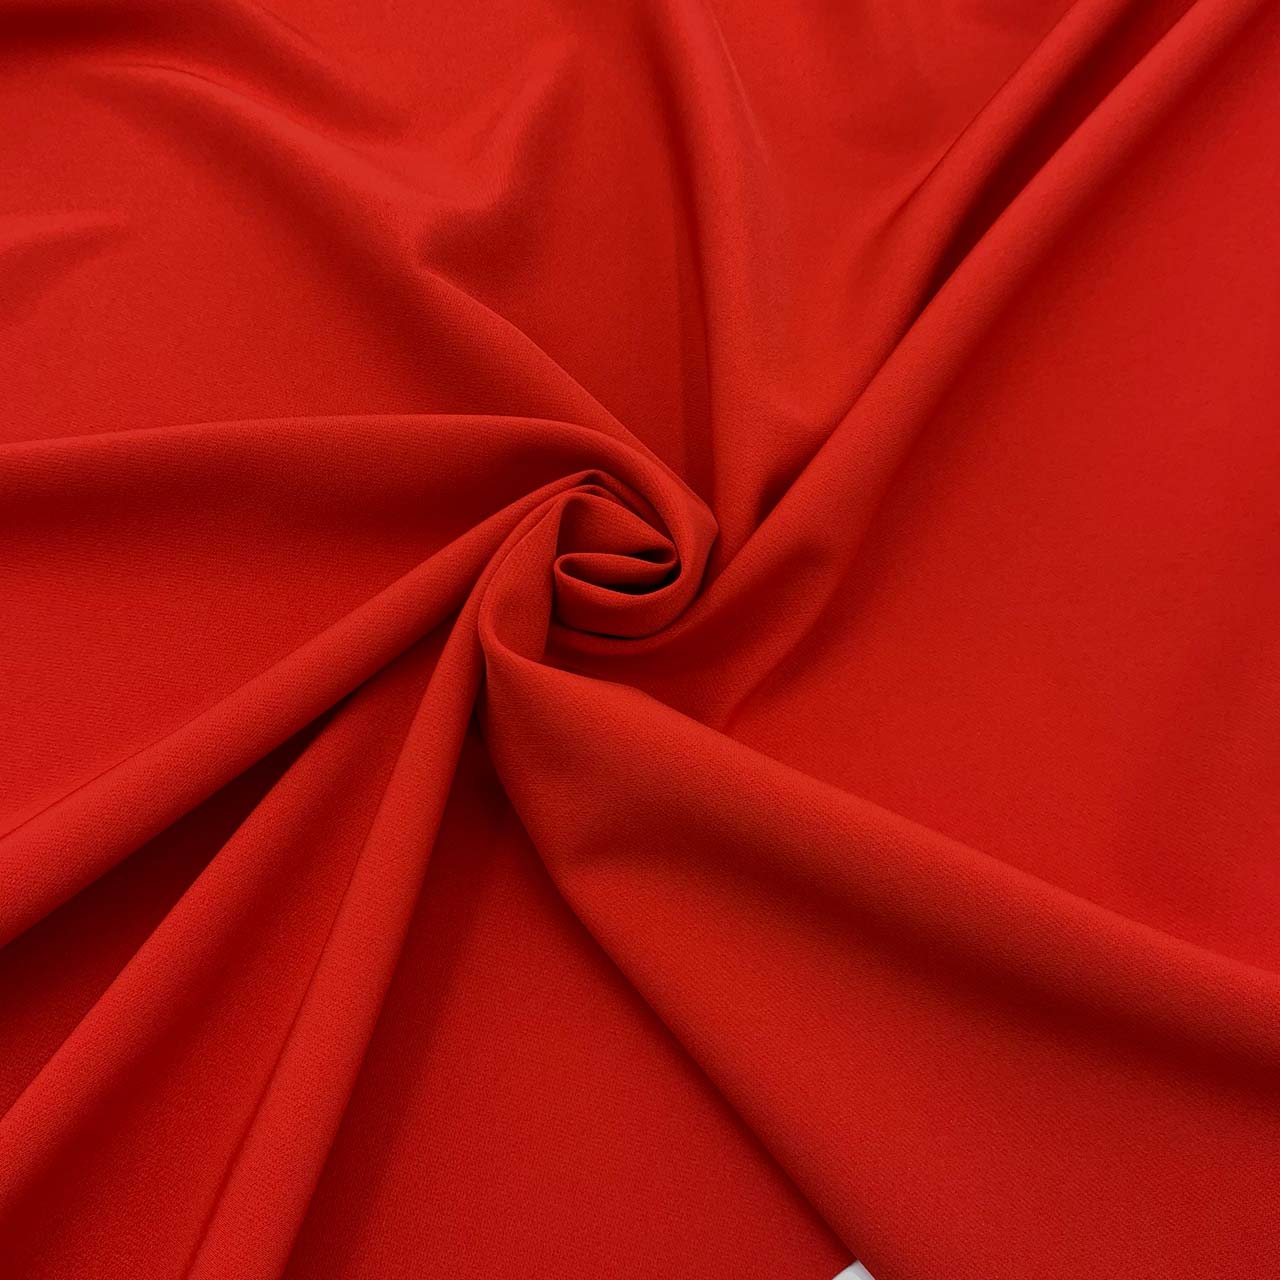 italian crepe fabric red crepe fabric collection